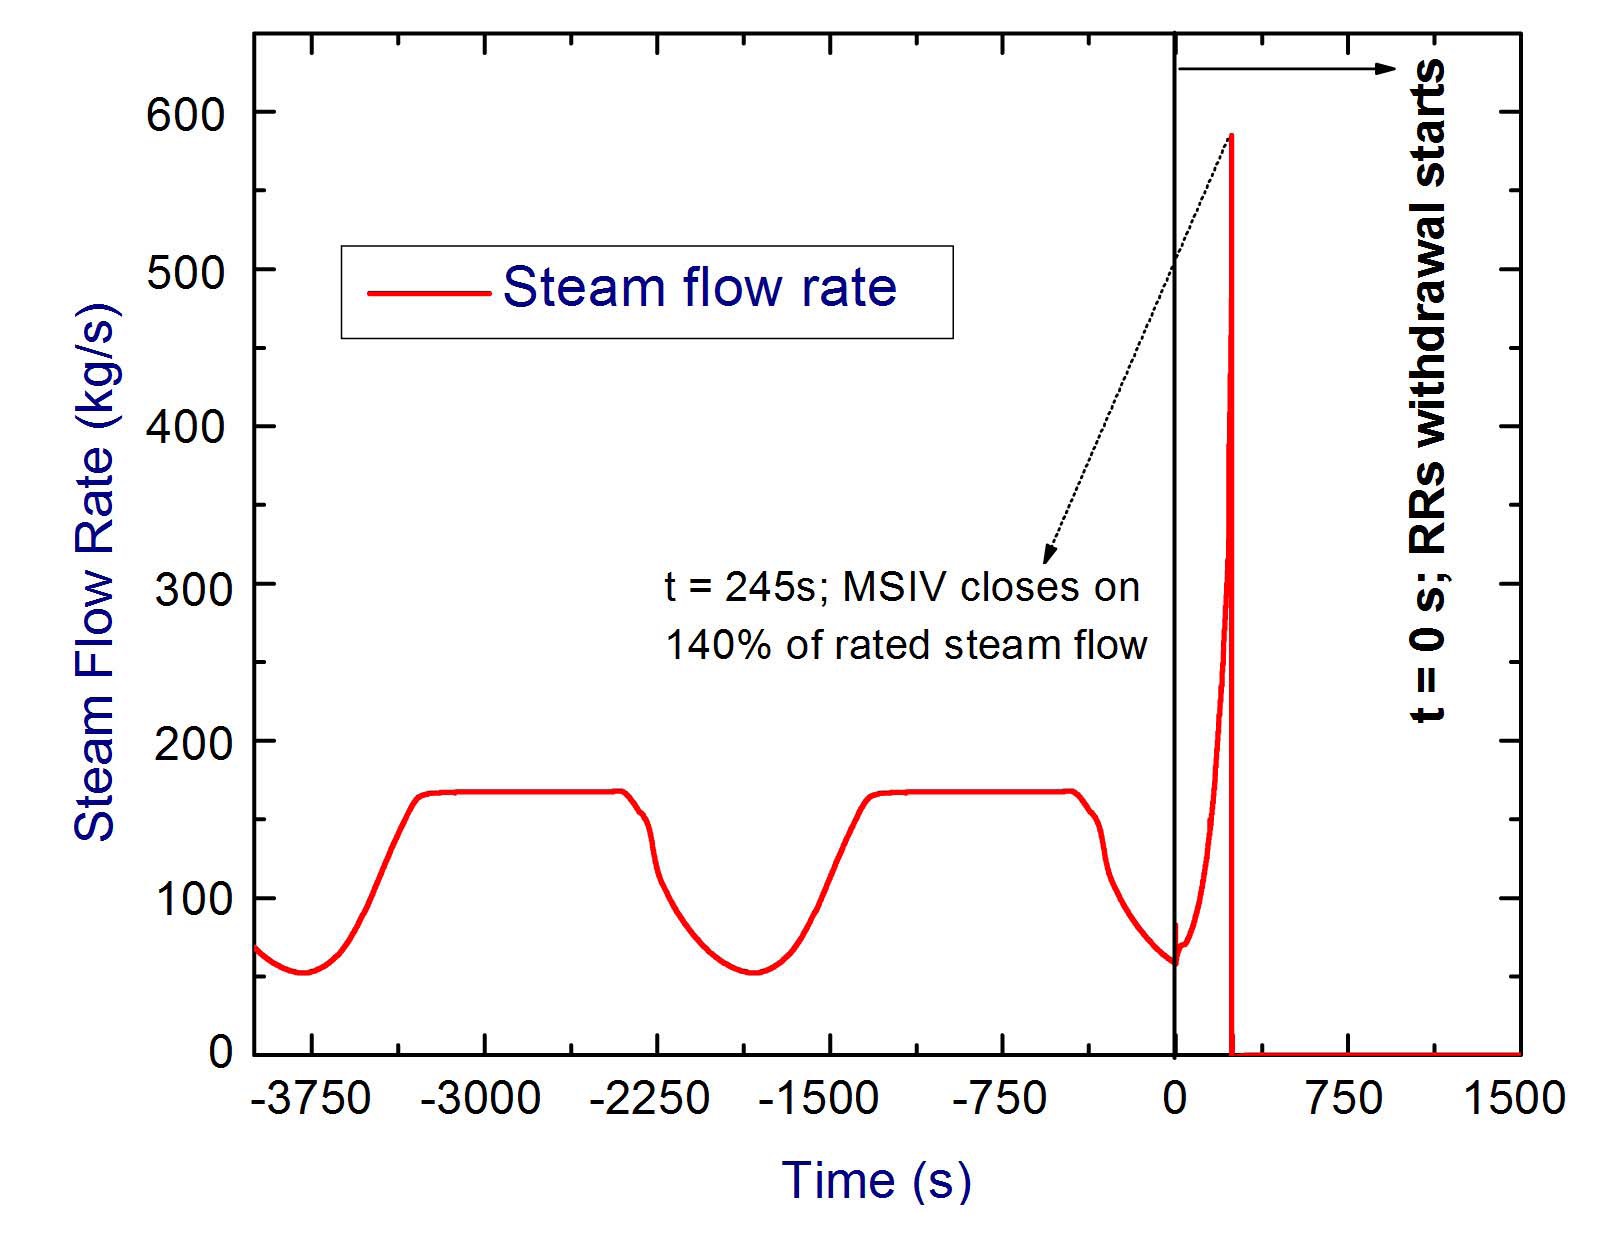 Steam Flow Rate Following Rod Withdrawal Transient for Chernobyl-like Accident